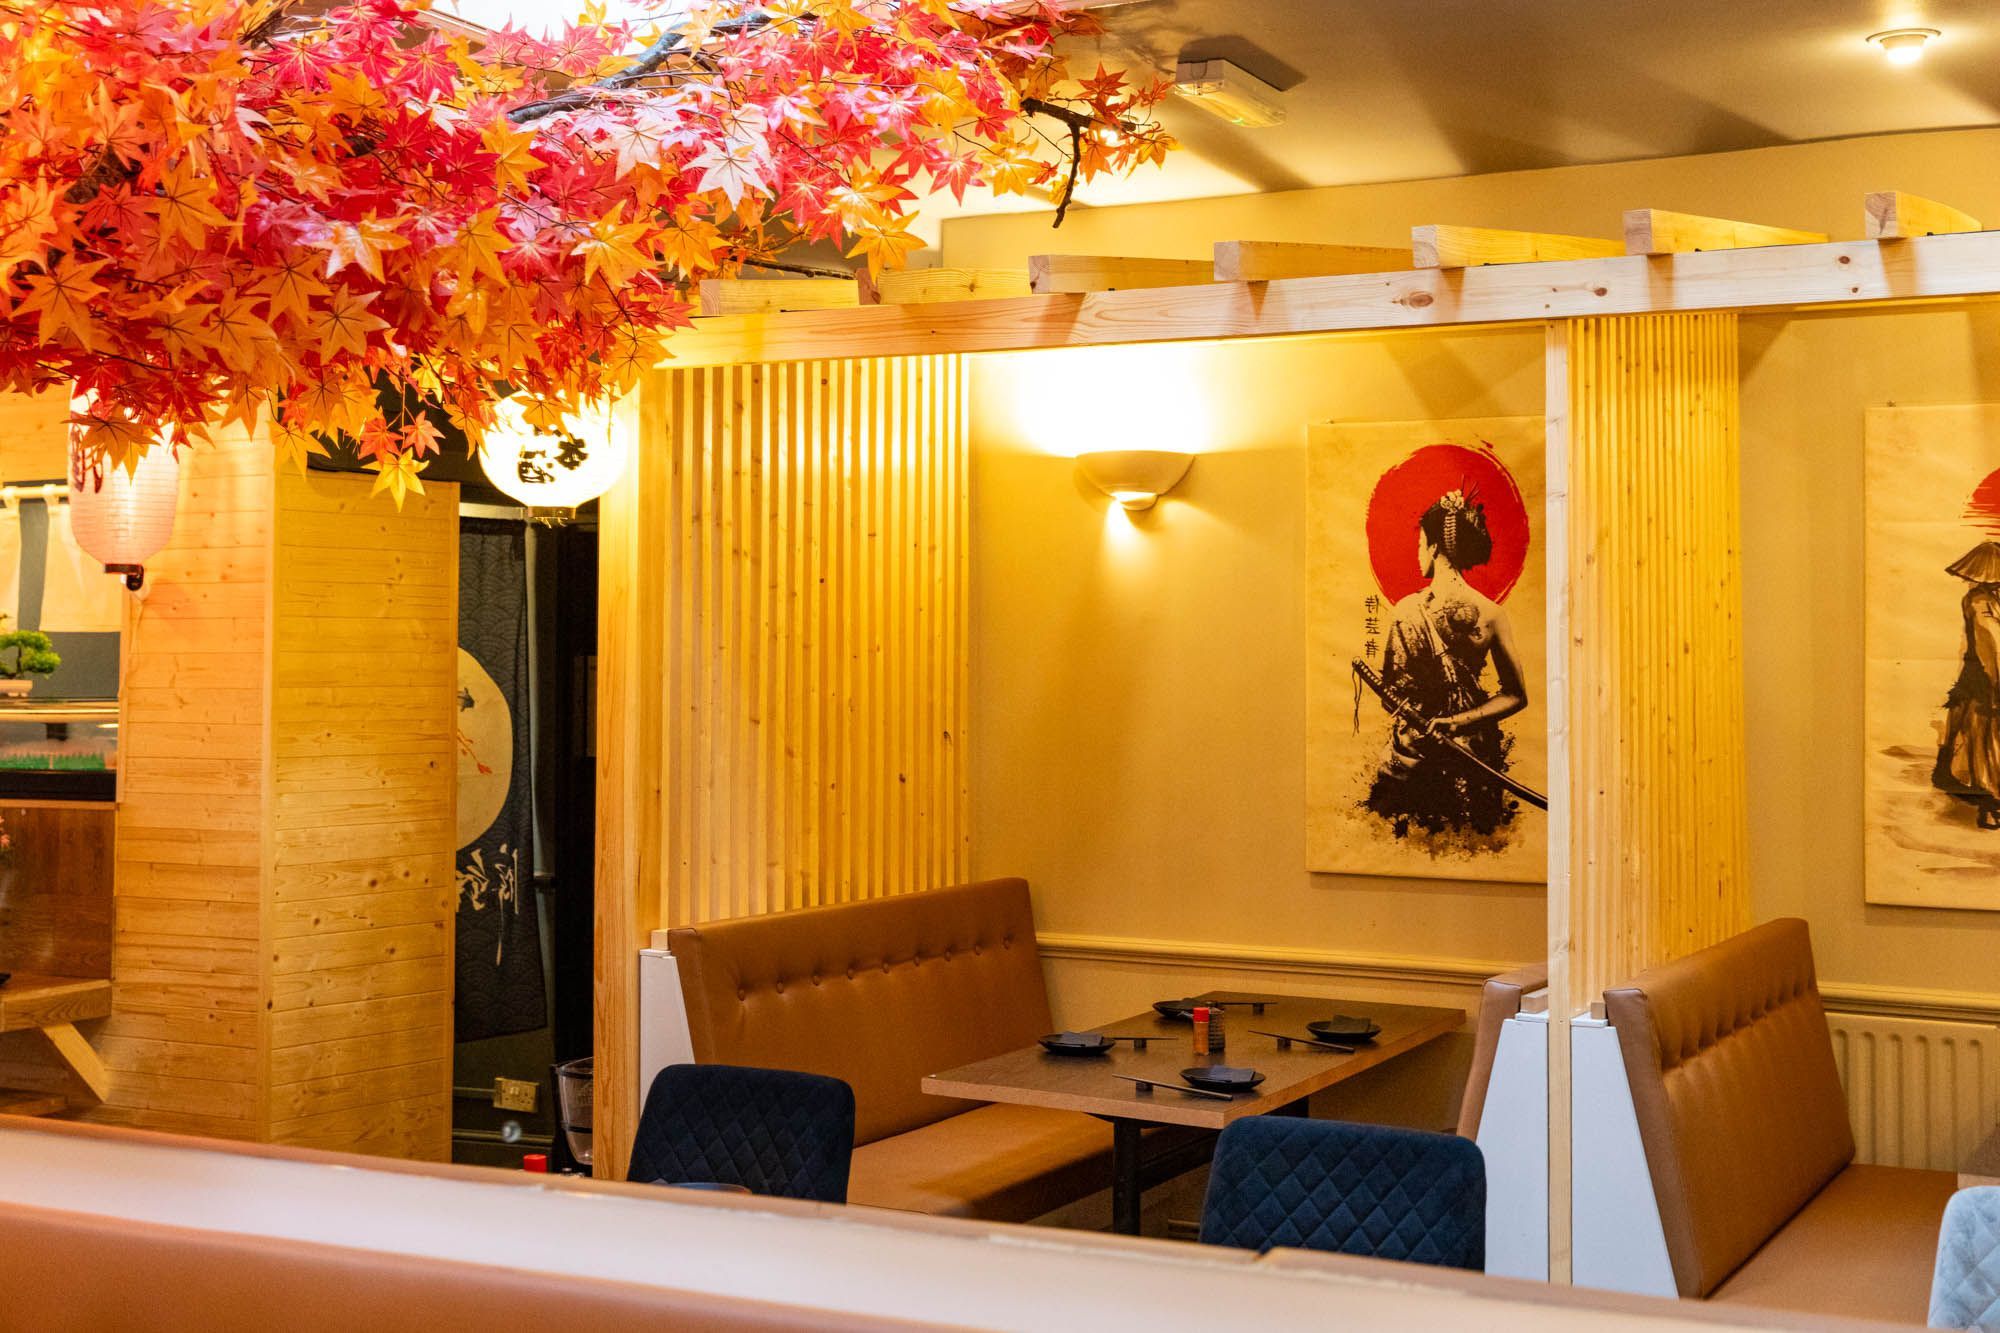 interior shot of Wabi Sabi, yellow walls and dim lights, tree with red and orange leaves